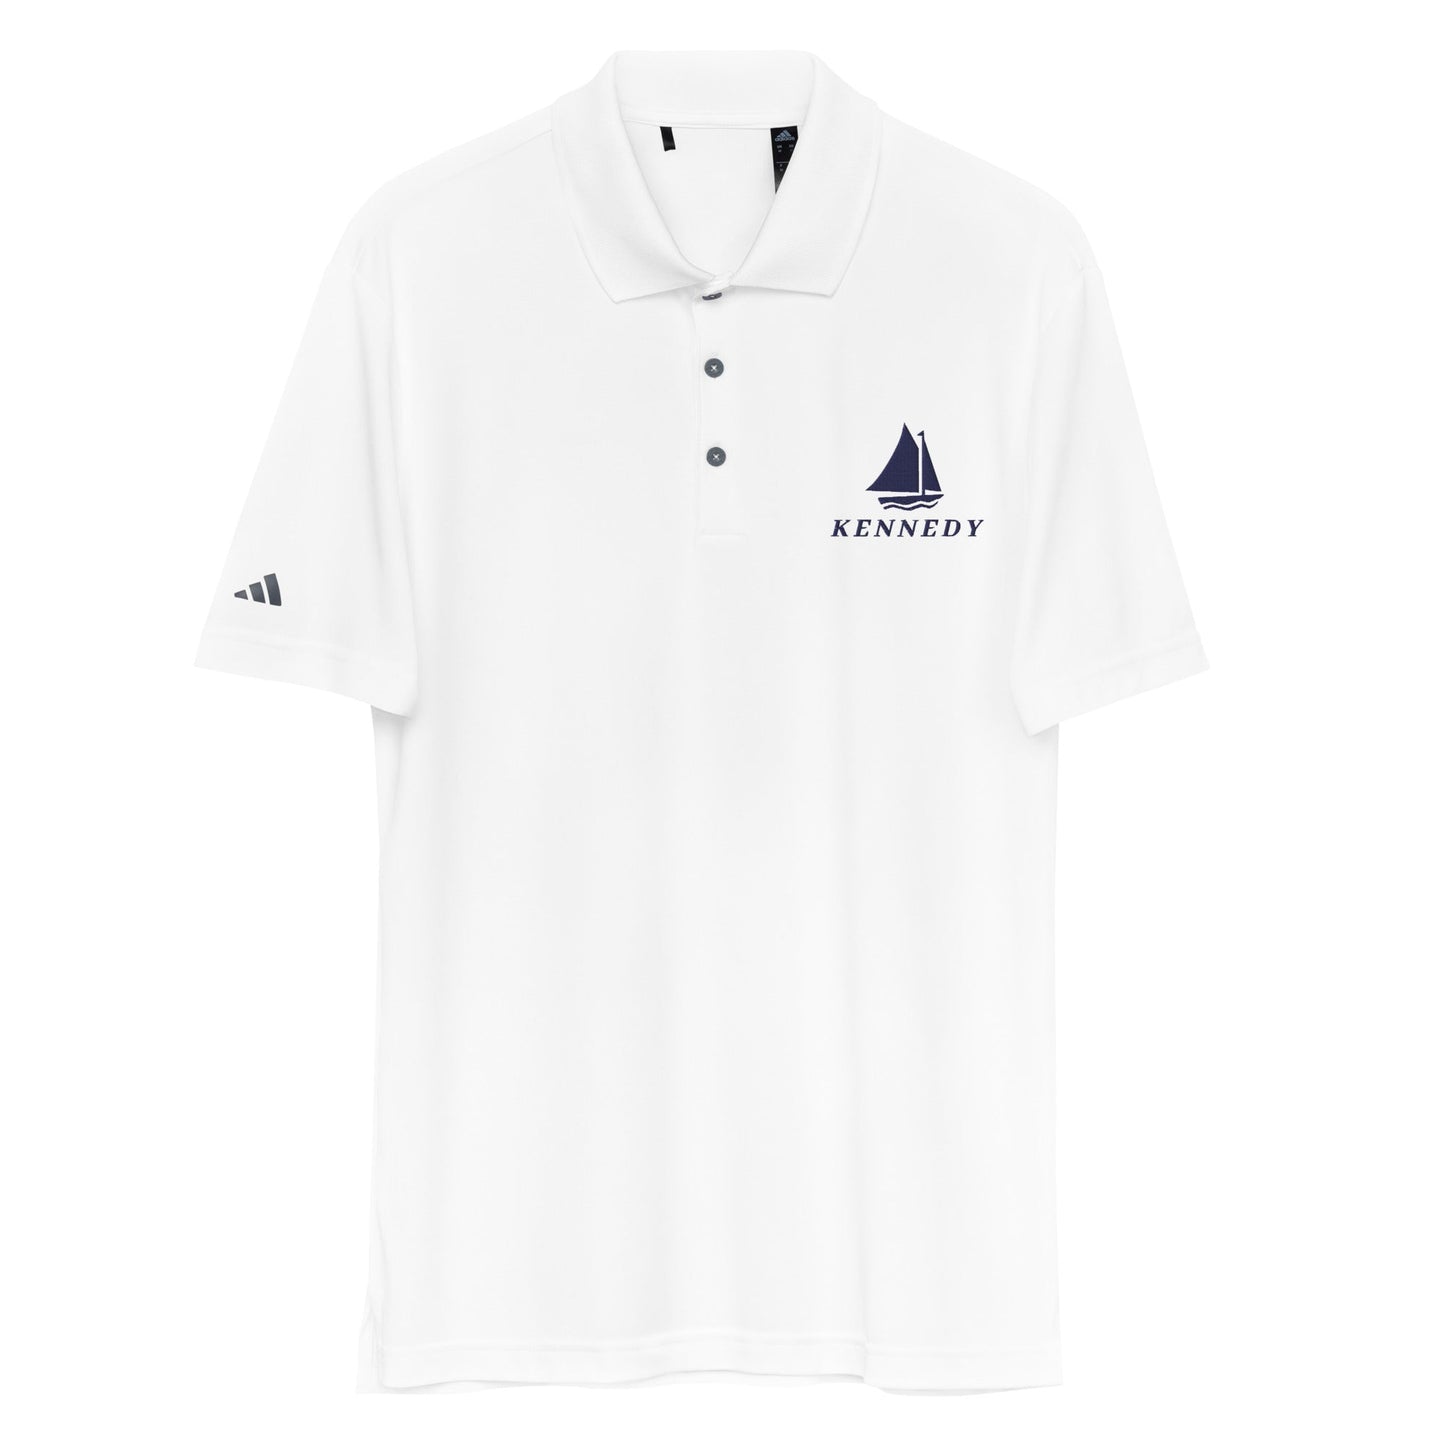 The Resolute Embroidered Adidas Polo Shirt - TEAM KENNEDY. All rights reserved